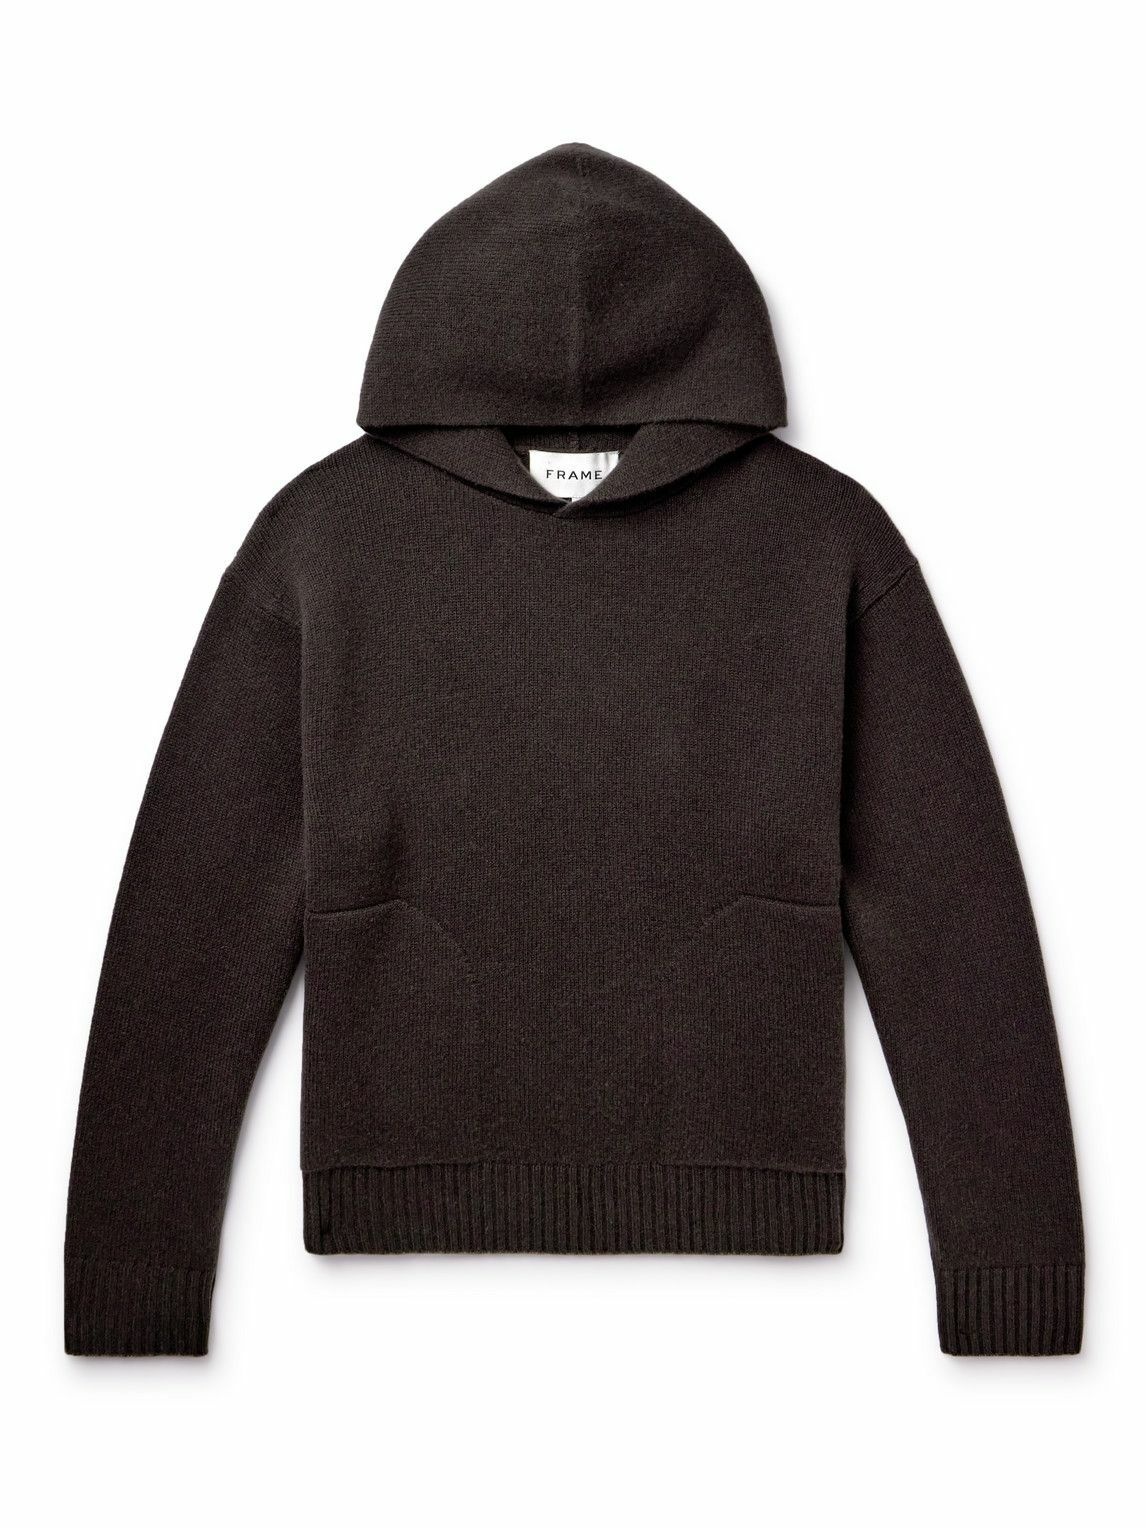 Photo: FRAME - Cashmere Hoodie - Brown